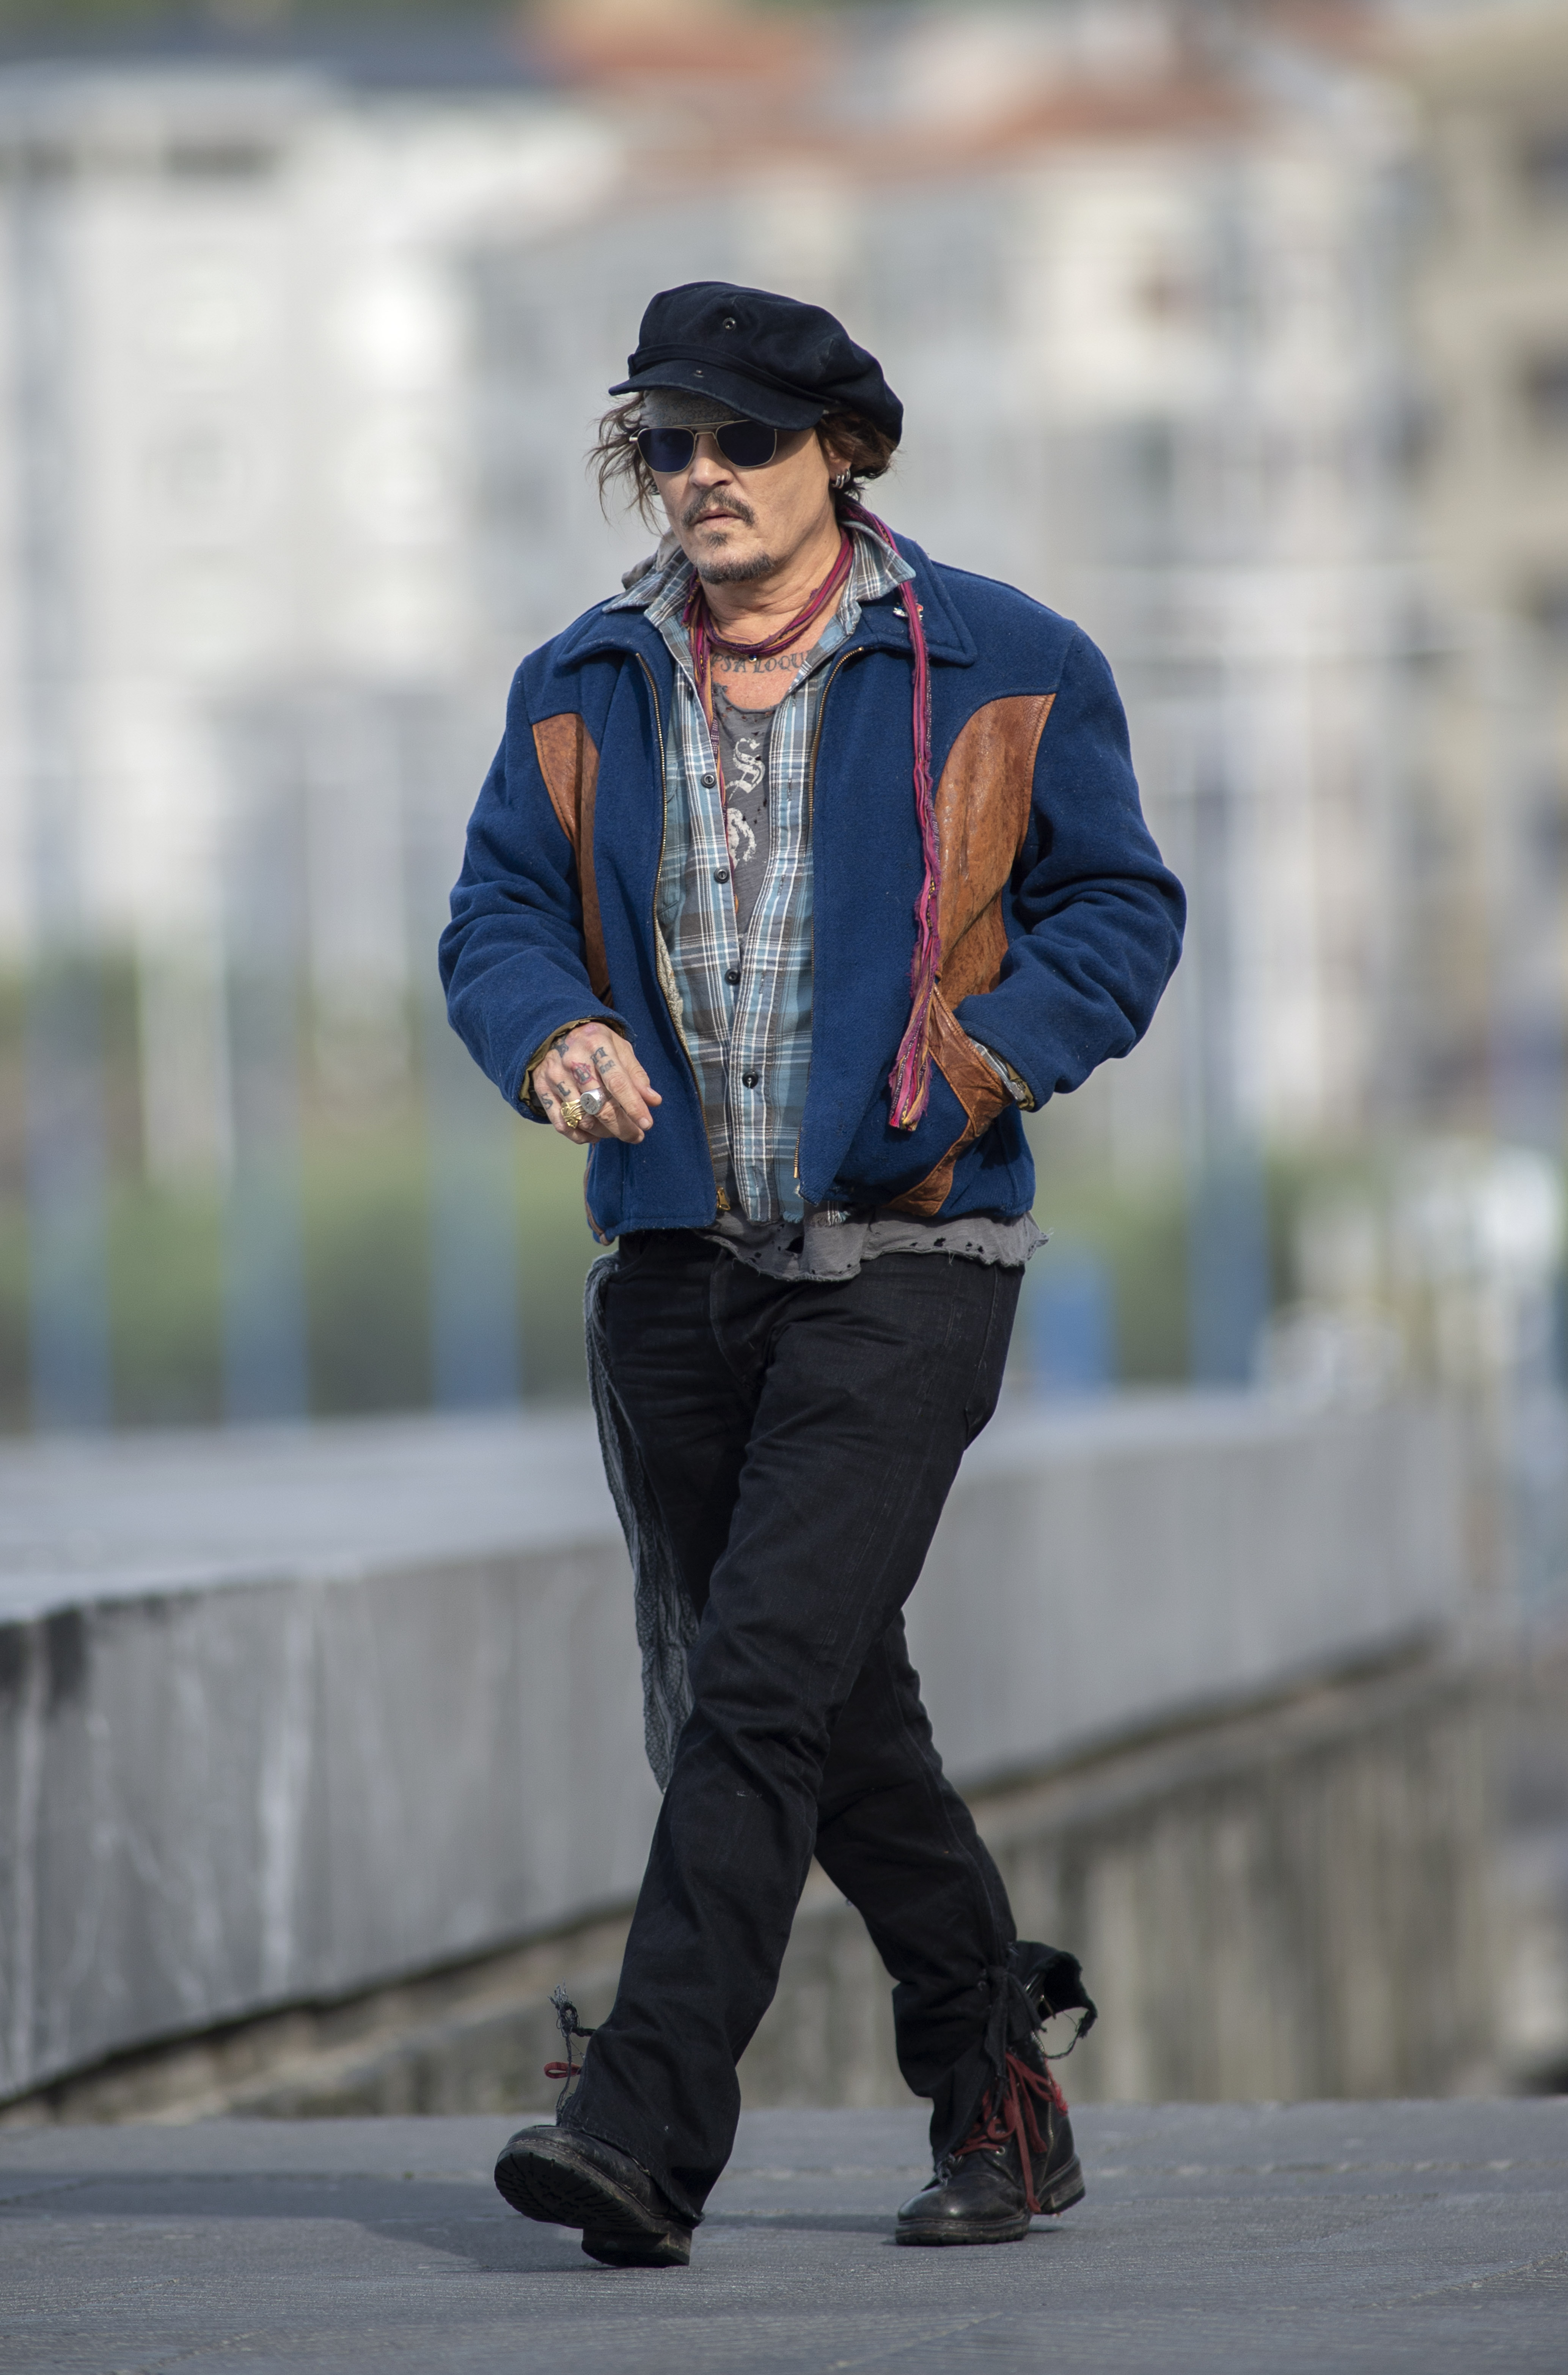 Actor Johnny Depp arrives at the 69th San Sebastian International Film Festival in Spain, 2021. | Source: Getty Images